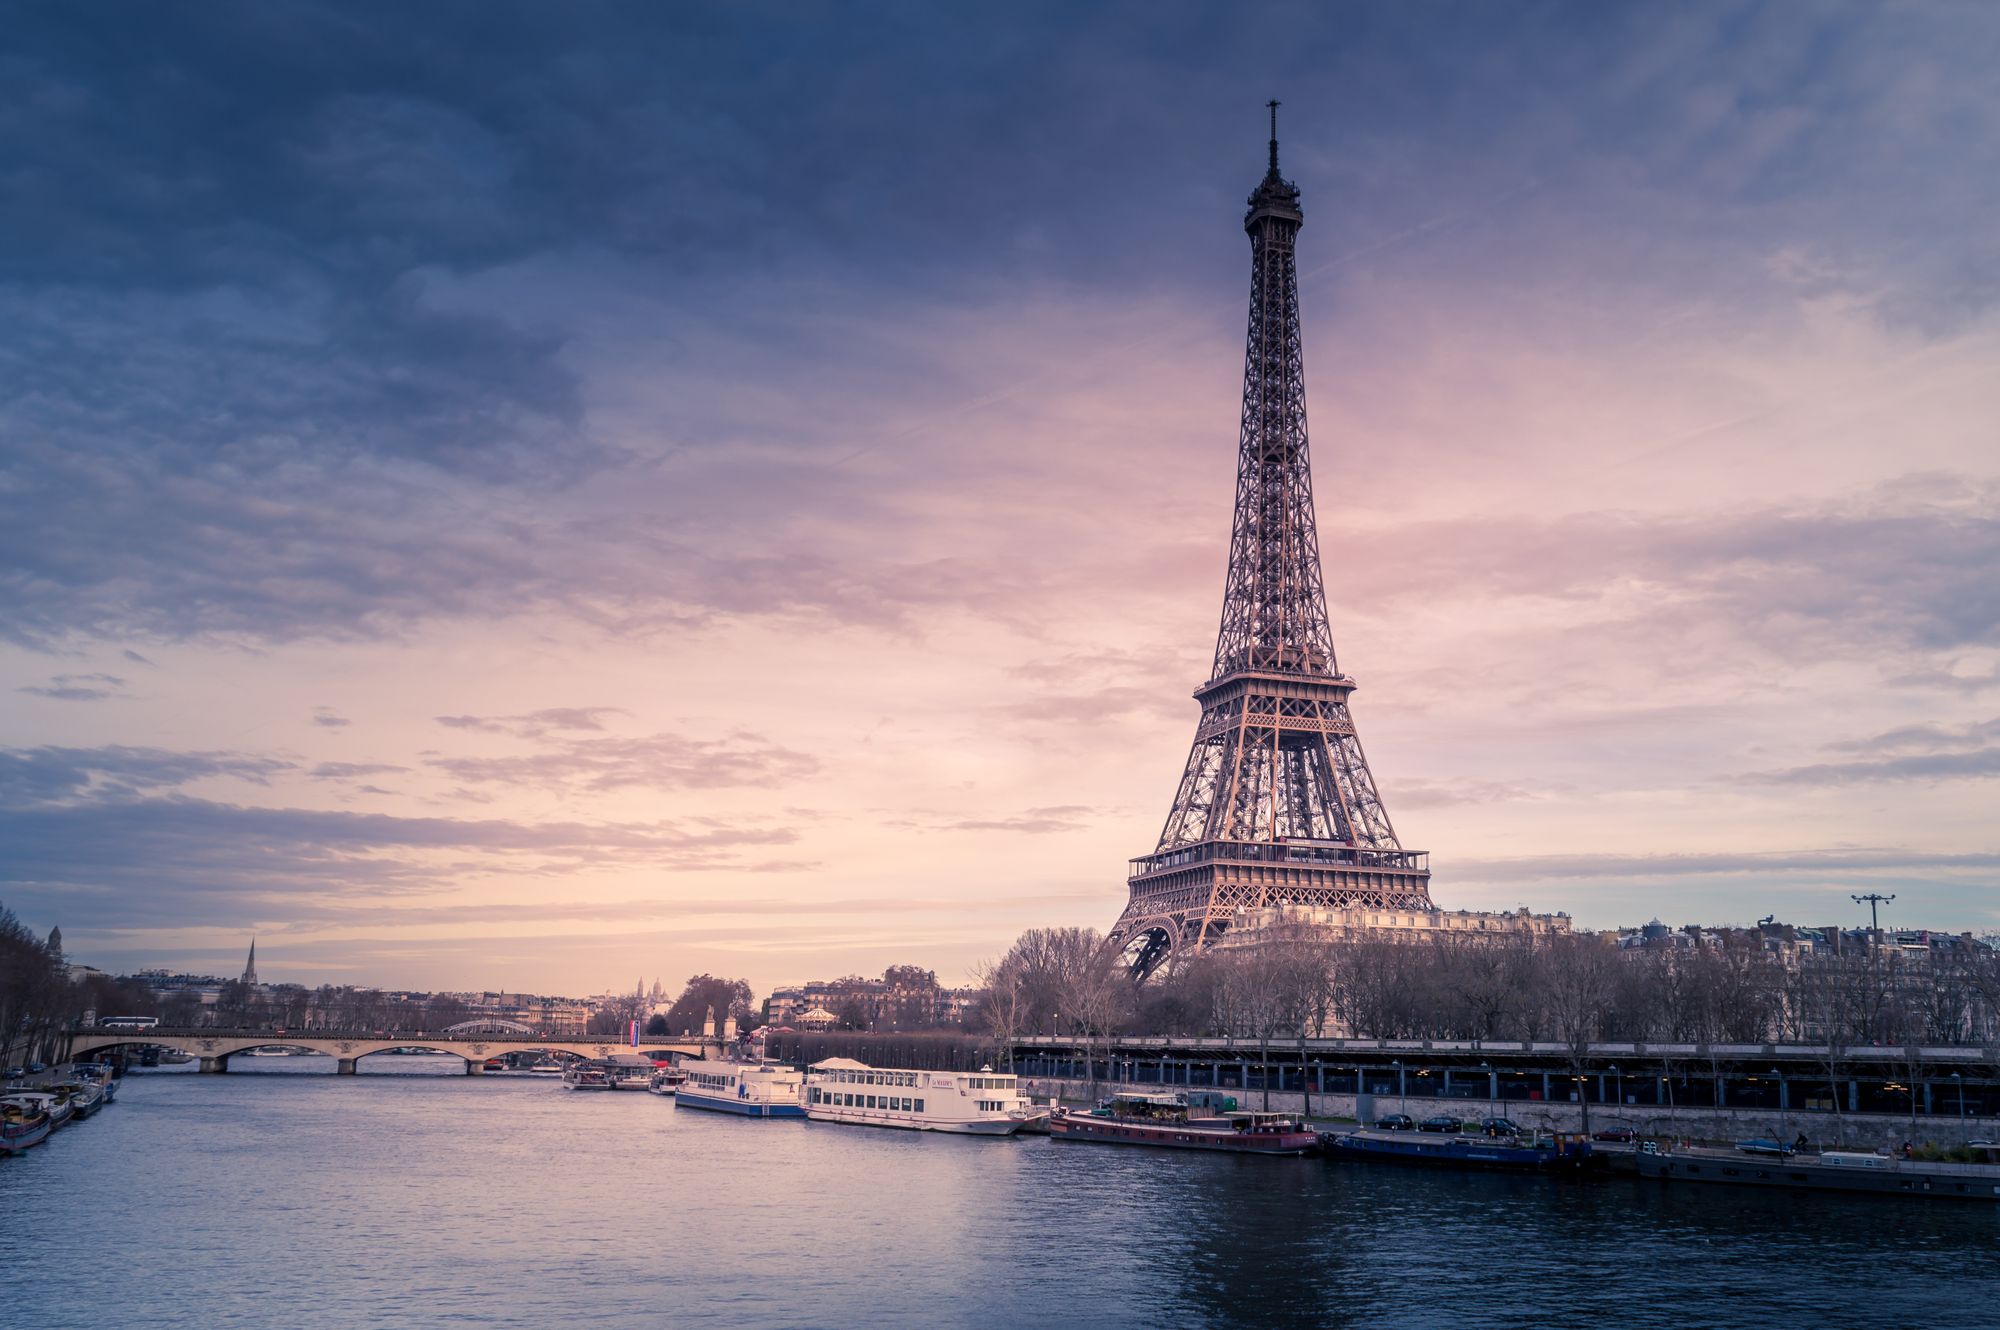 The Visa Delivered by the French Financial Regulator (AMF) to Issuers of Initial Coin Offerings (ICOs)